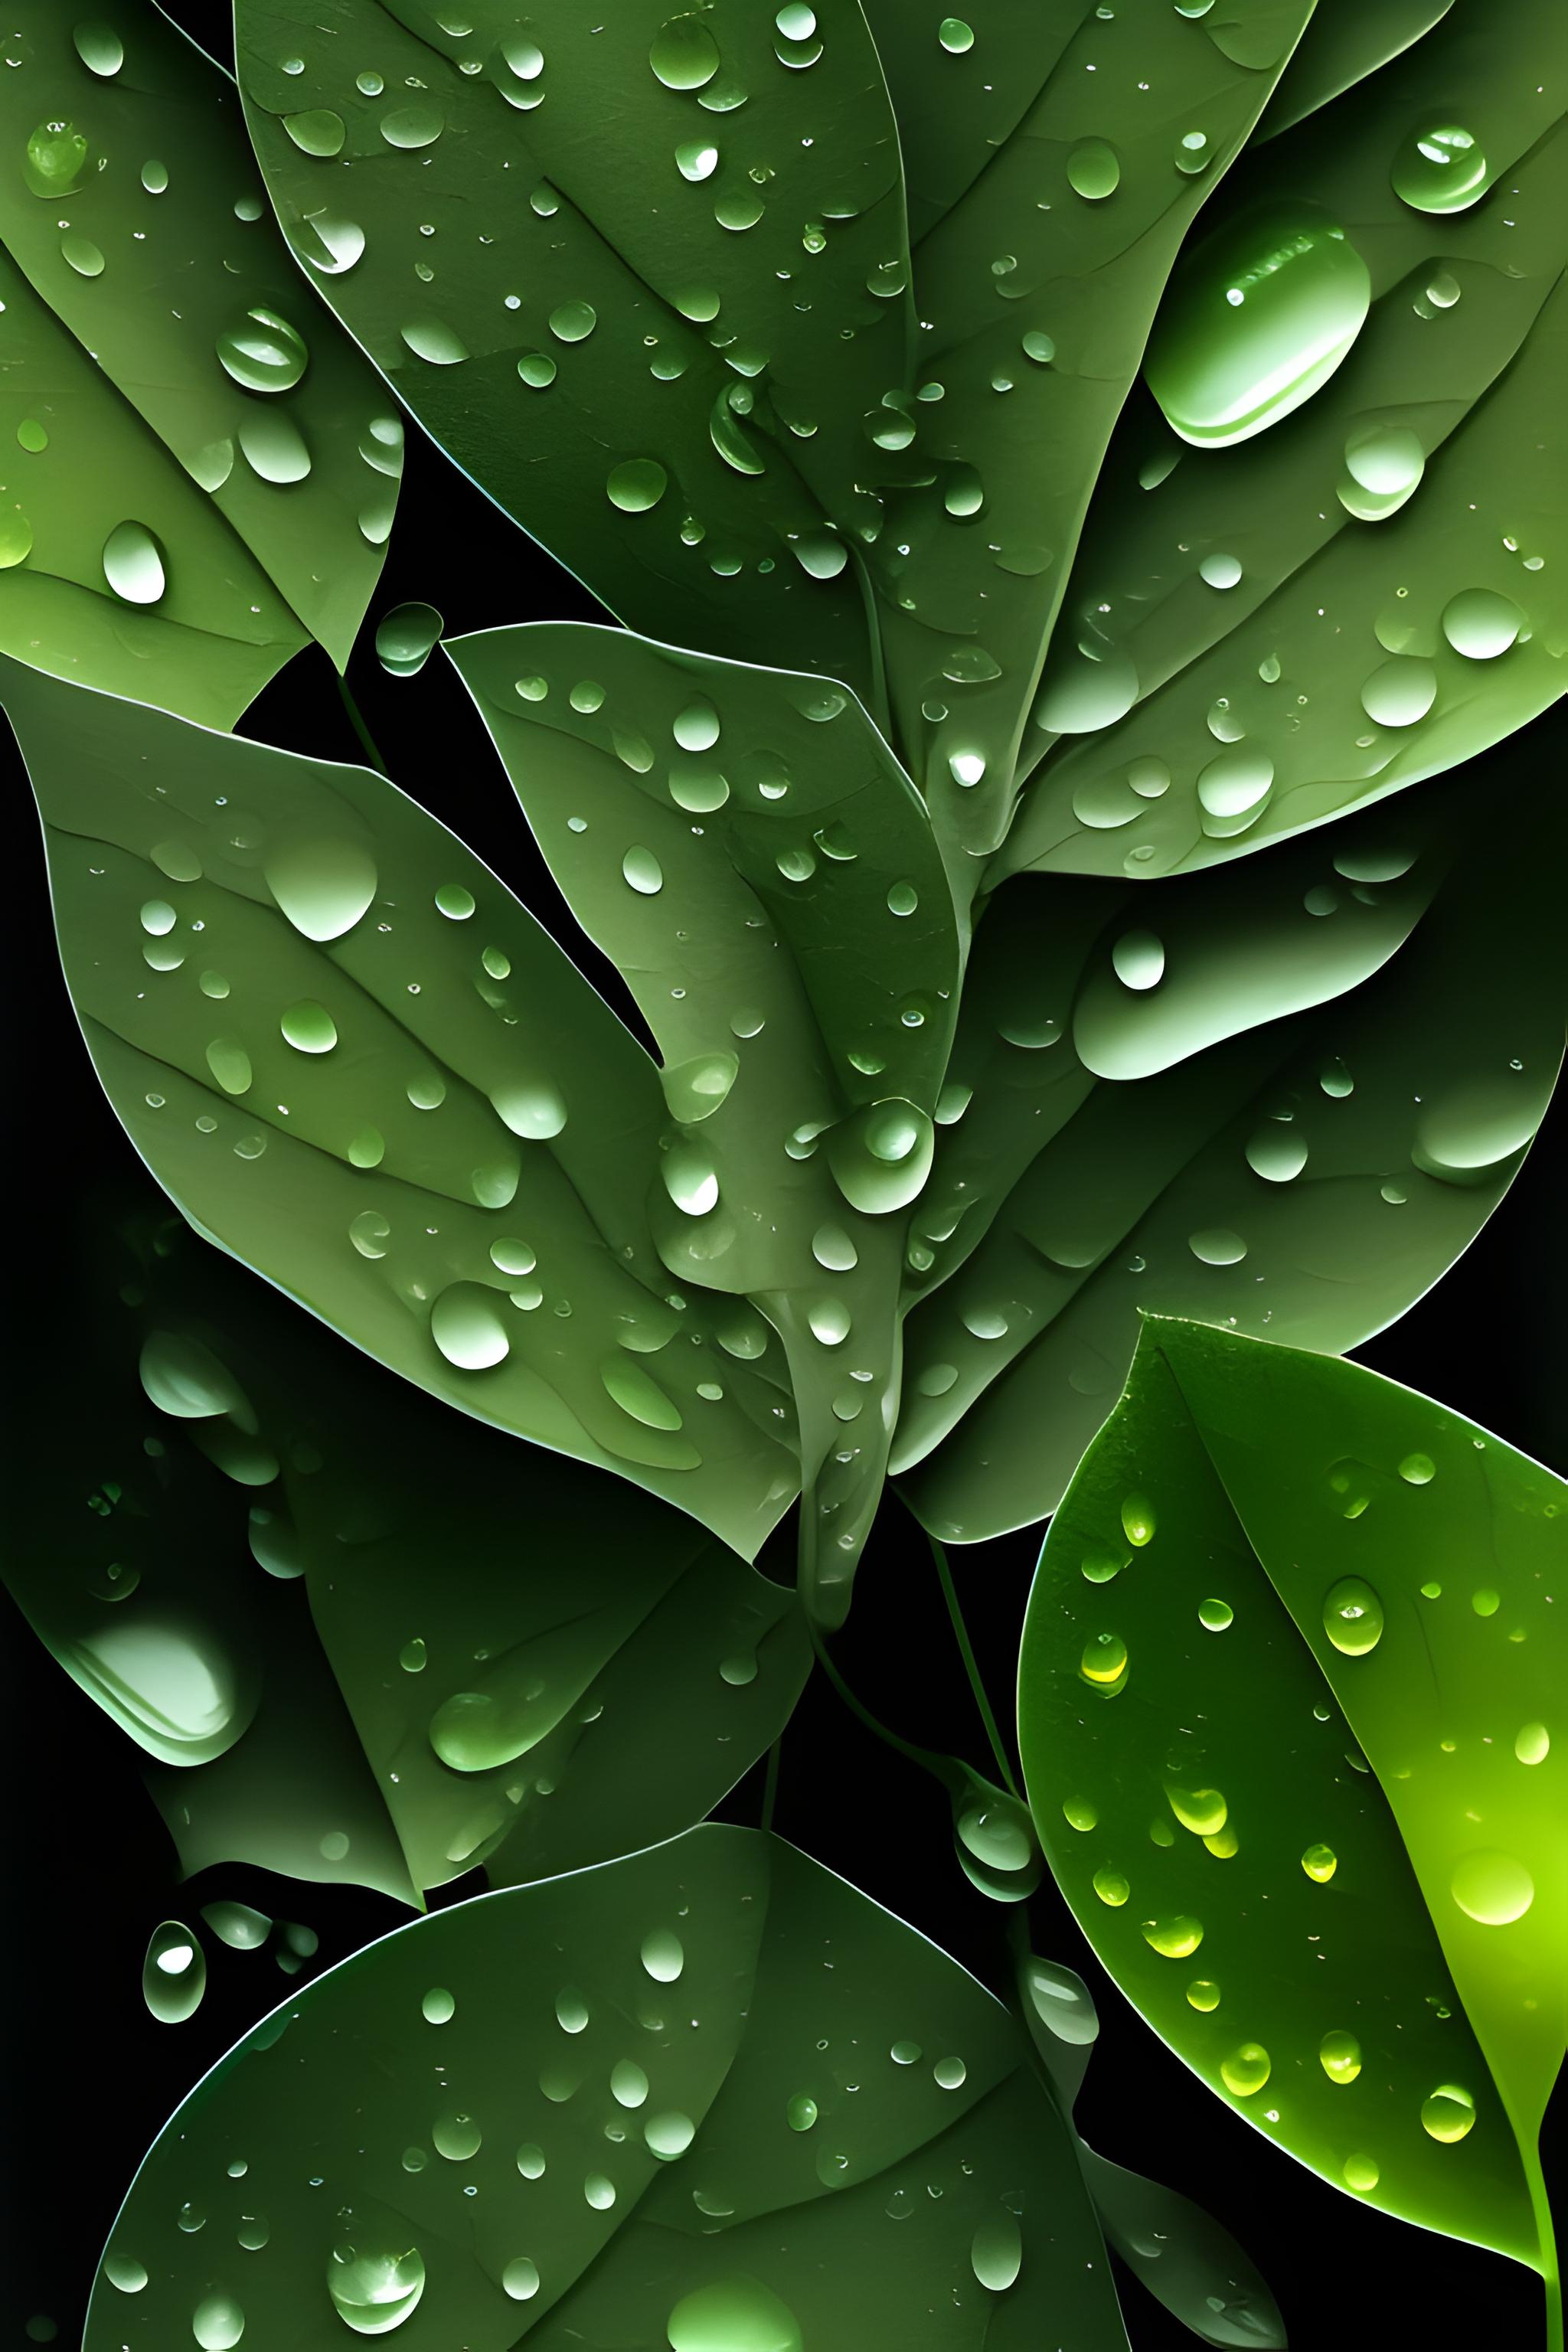 Dark green leaves with water droplets 